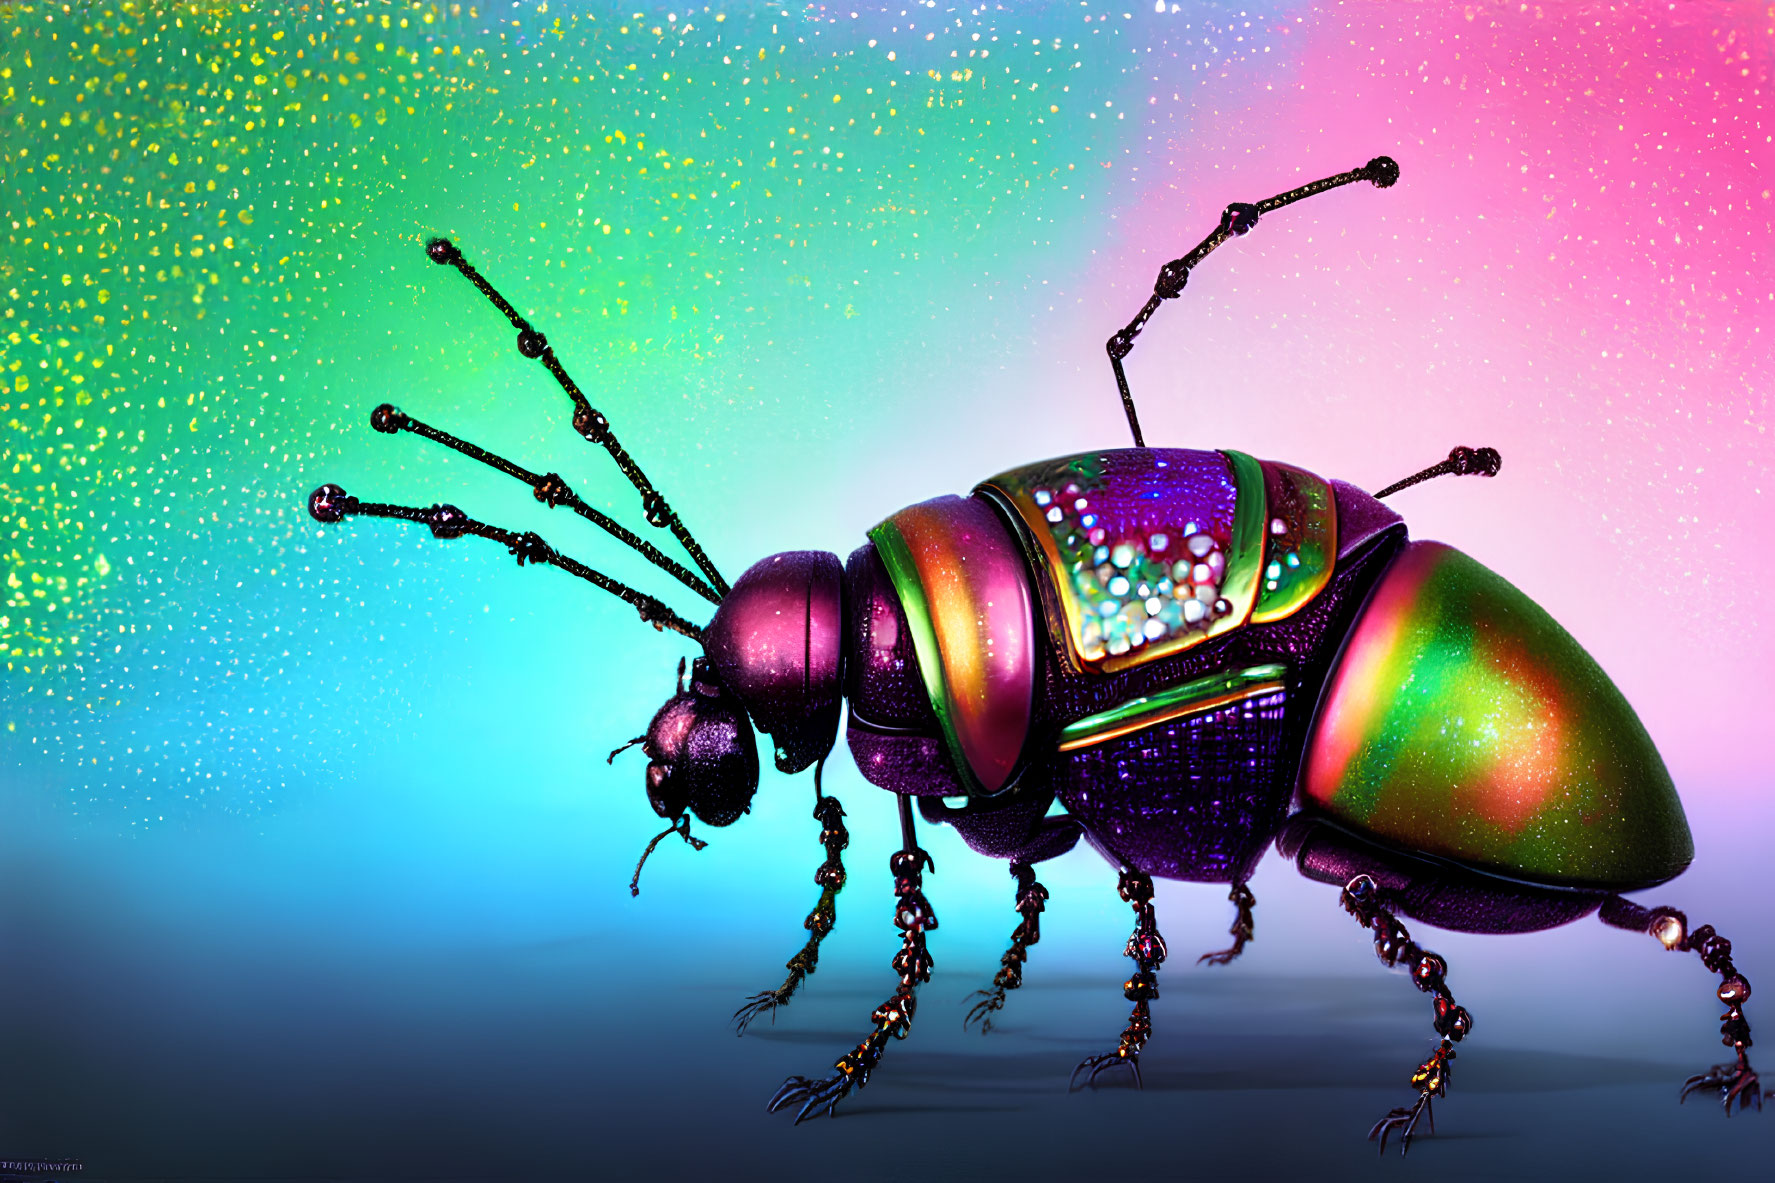 Colorful Iridescent Beetle with Delicate Antennae on Sparkling Gradient Background